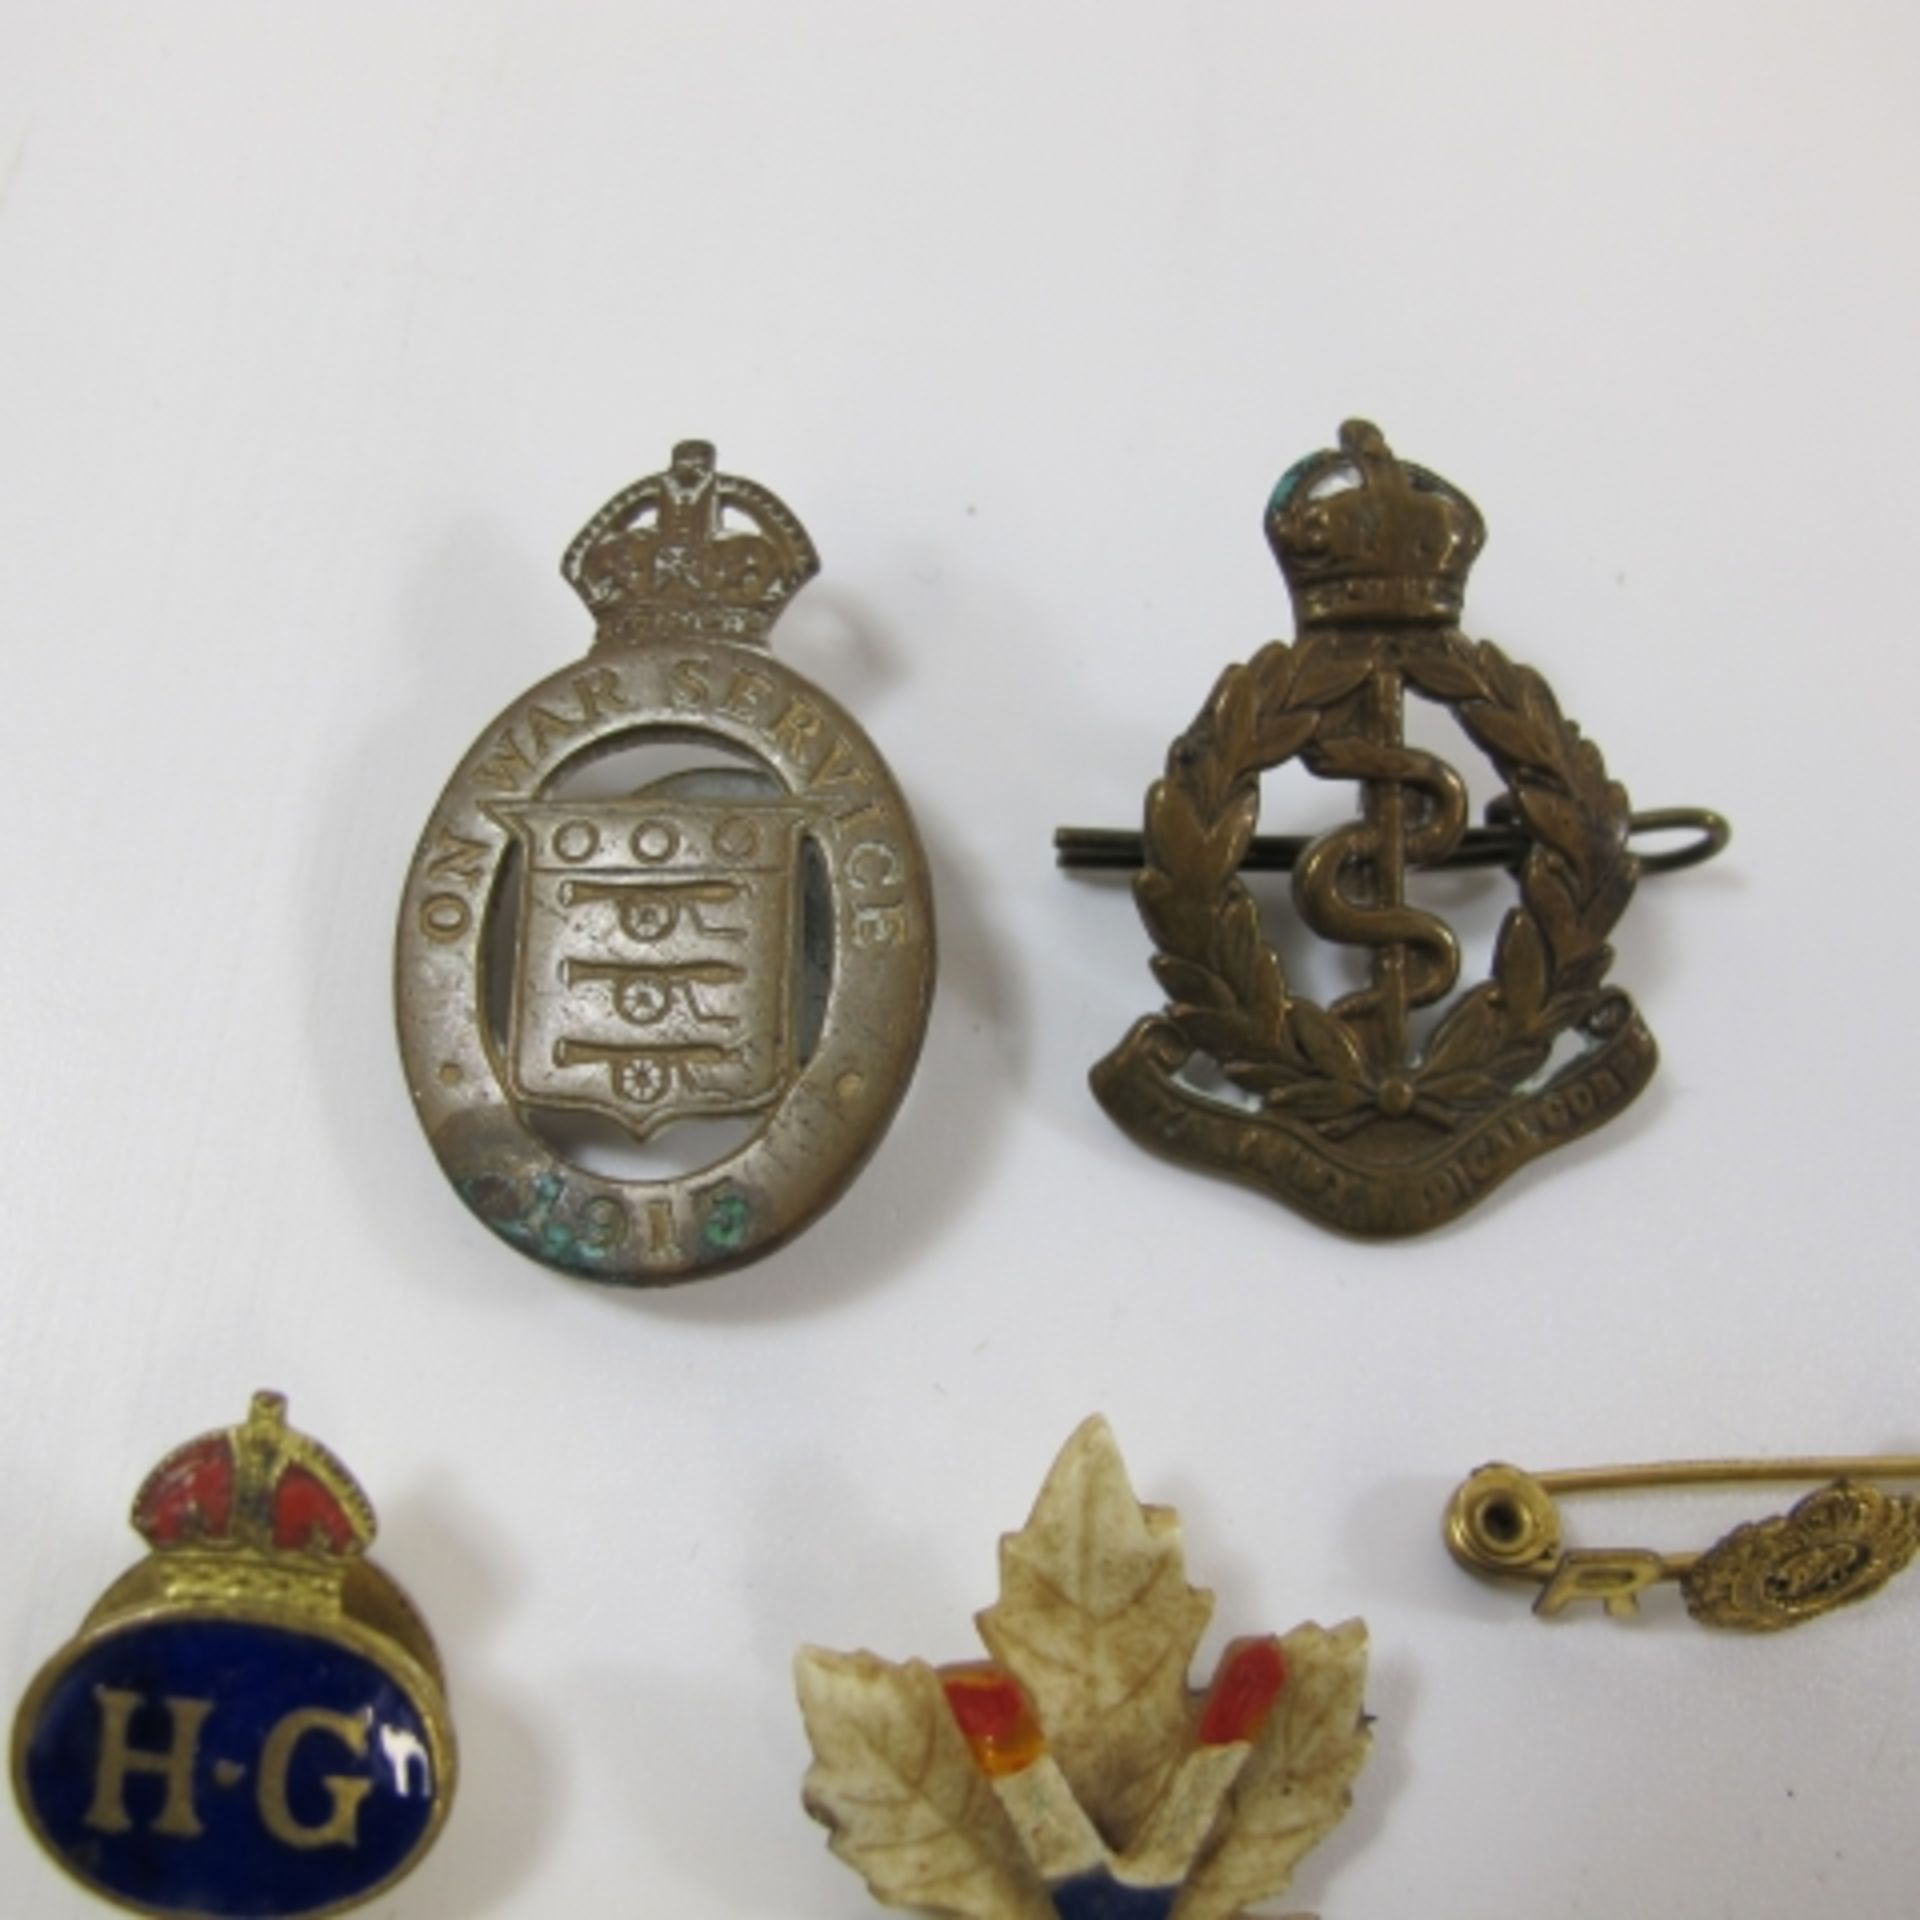 WW1 and WW2 Badges - on War Services 1915, WW2 Girls Training Corps (GTC) in Chromium, Observer - Image 3 of 3